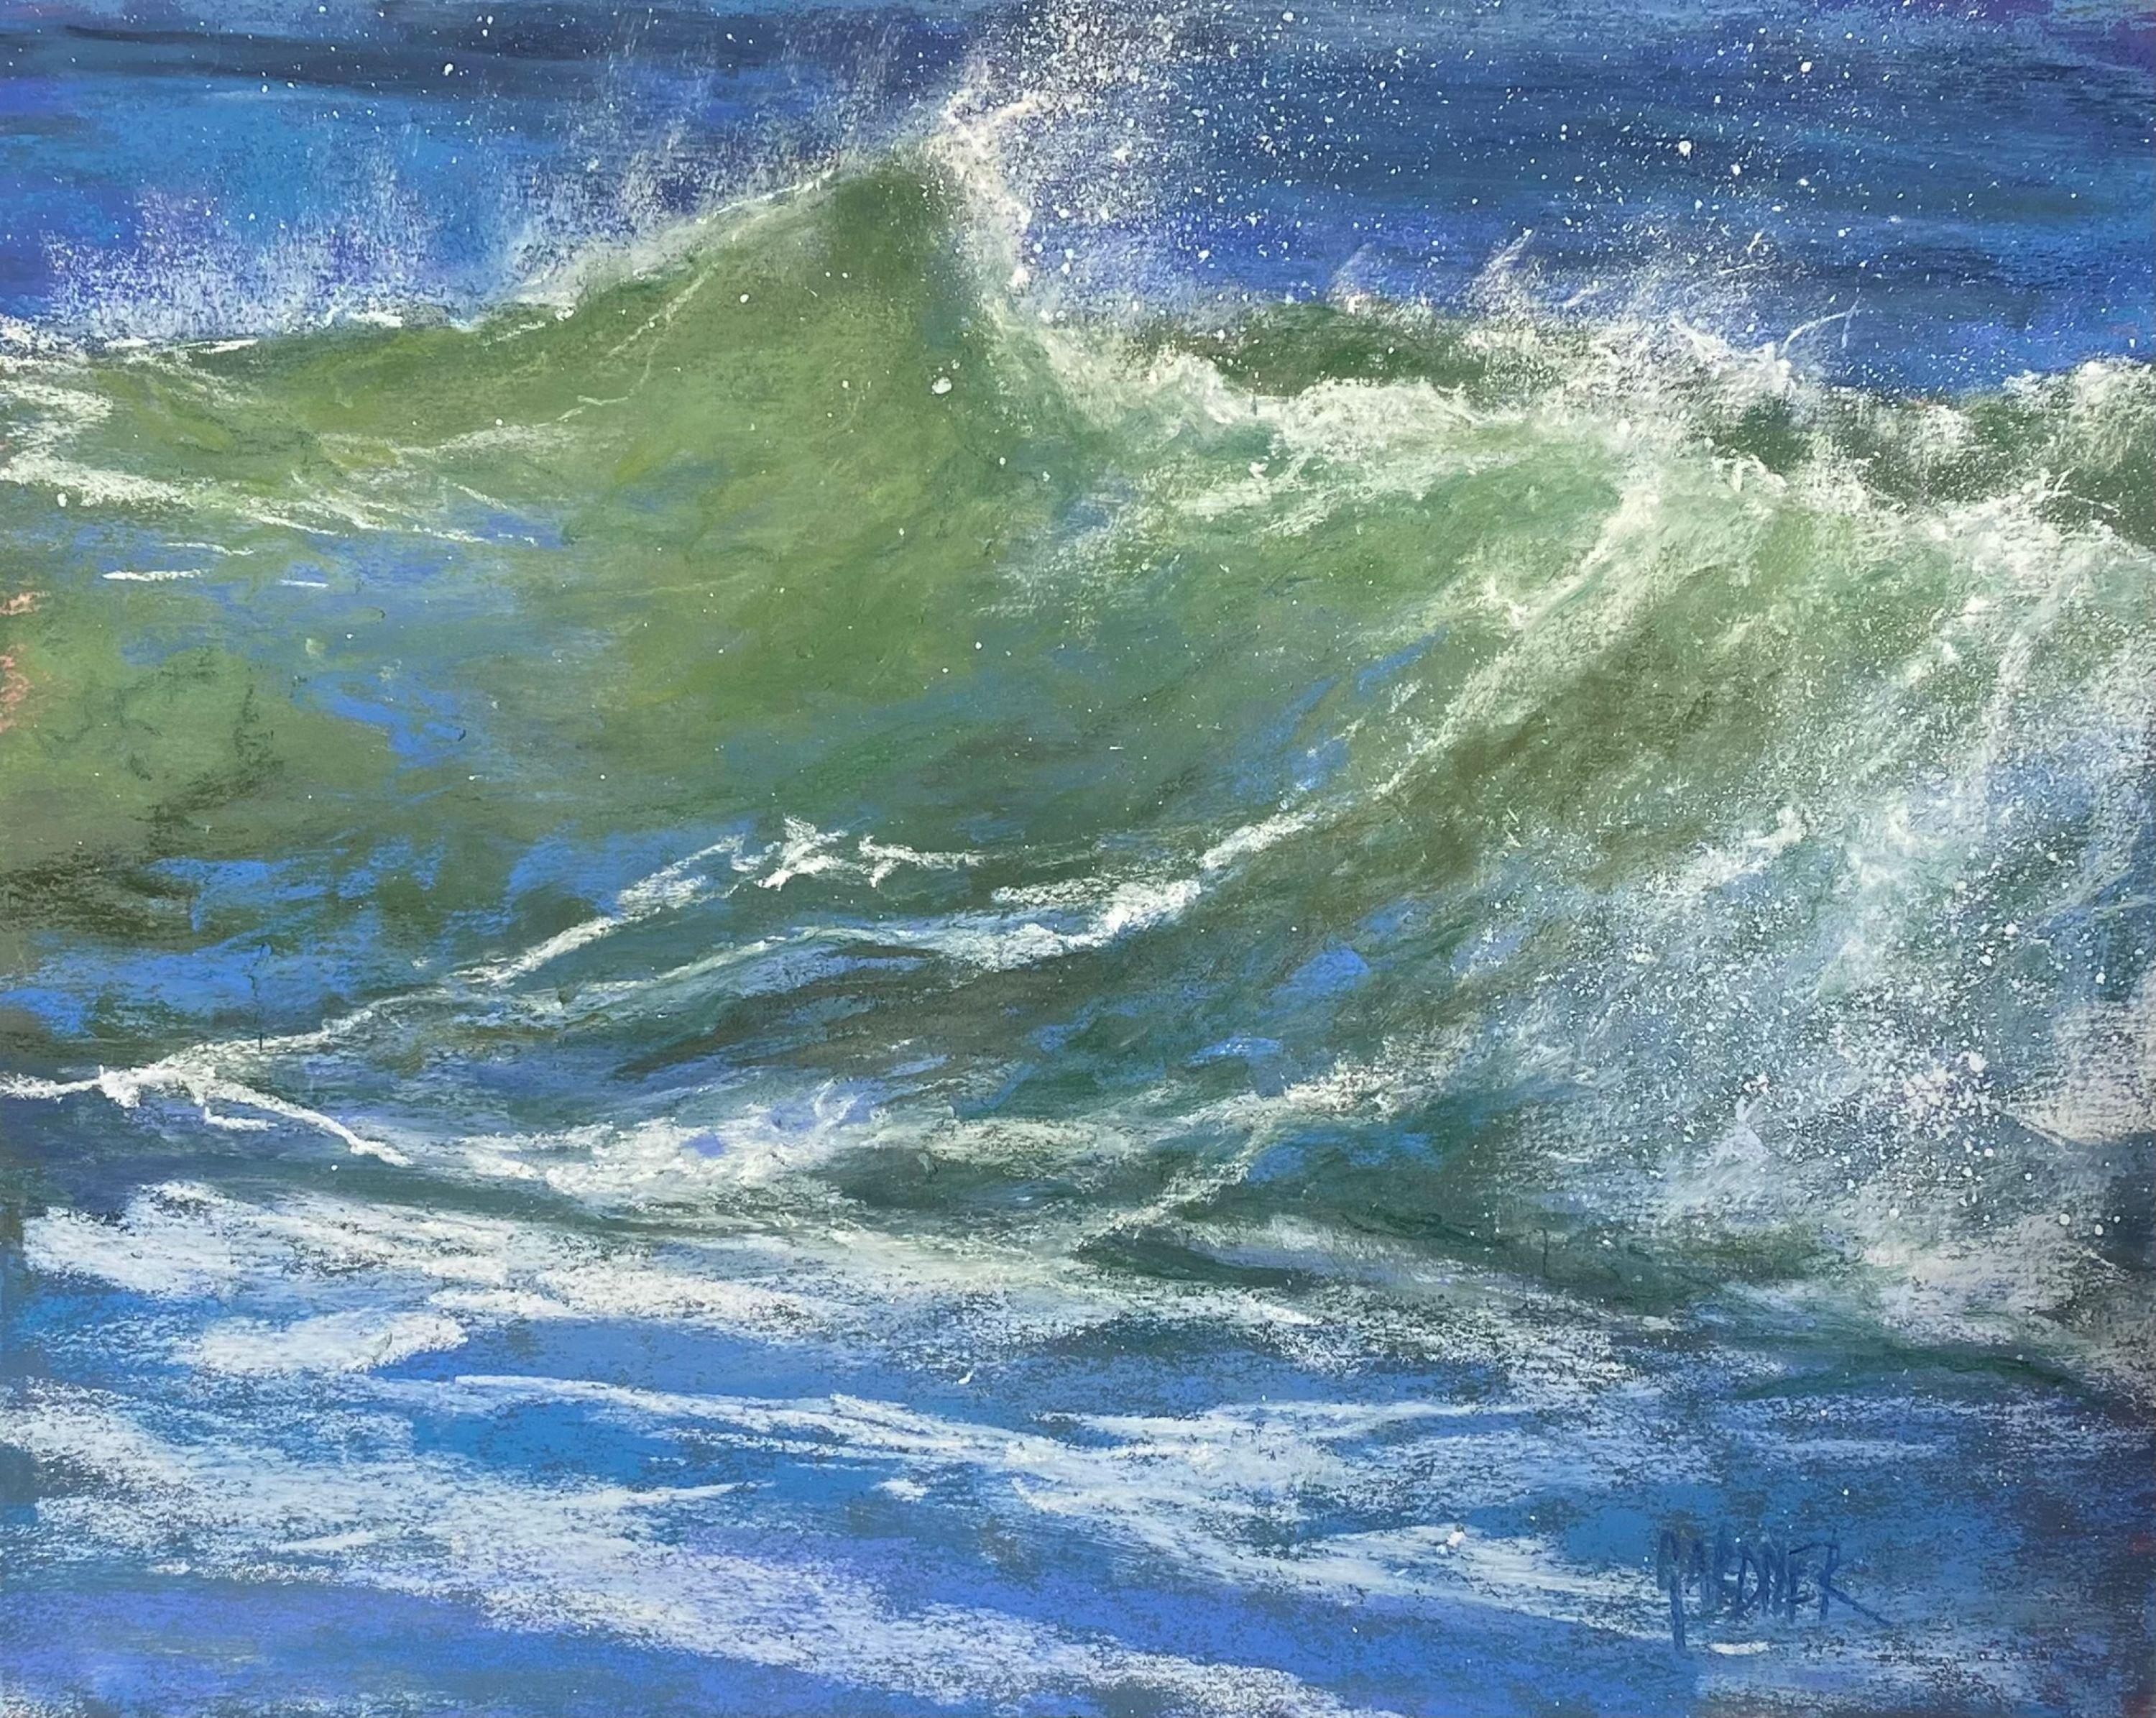 Above The Fray, Original Contemporary Impressionist Seascape Painting, 2022
8" x 10" (HxW) Pastel on Paper
Hand-signed by the artist.

This impressionist pastel drawing by artist Dina Gardner zooms in on the surface of the ocean as it crashes in on